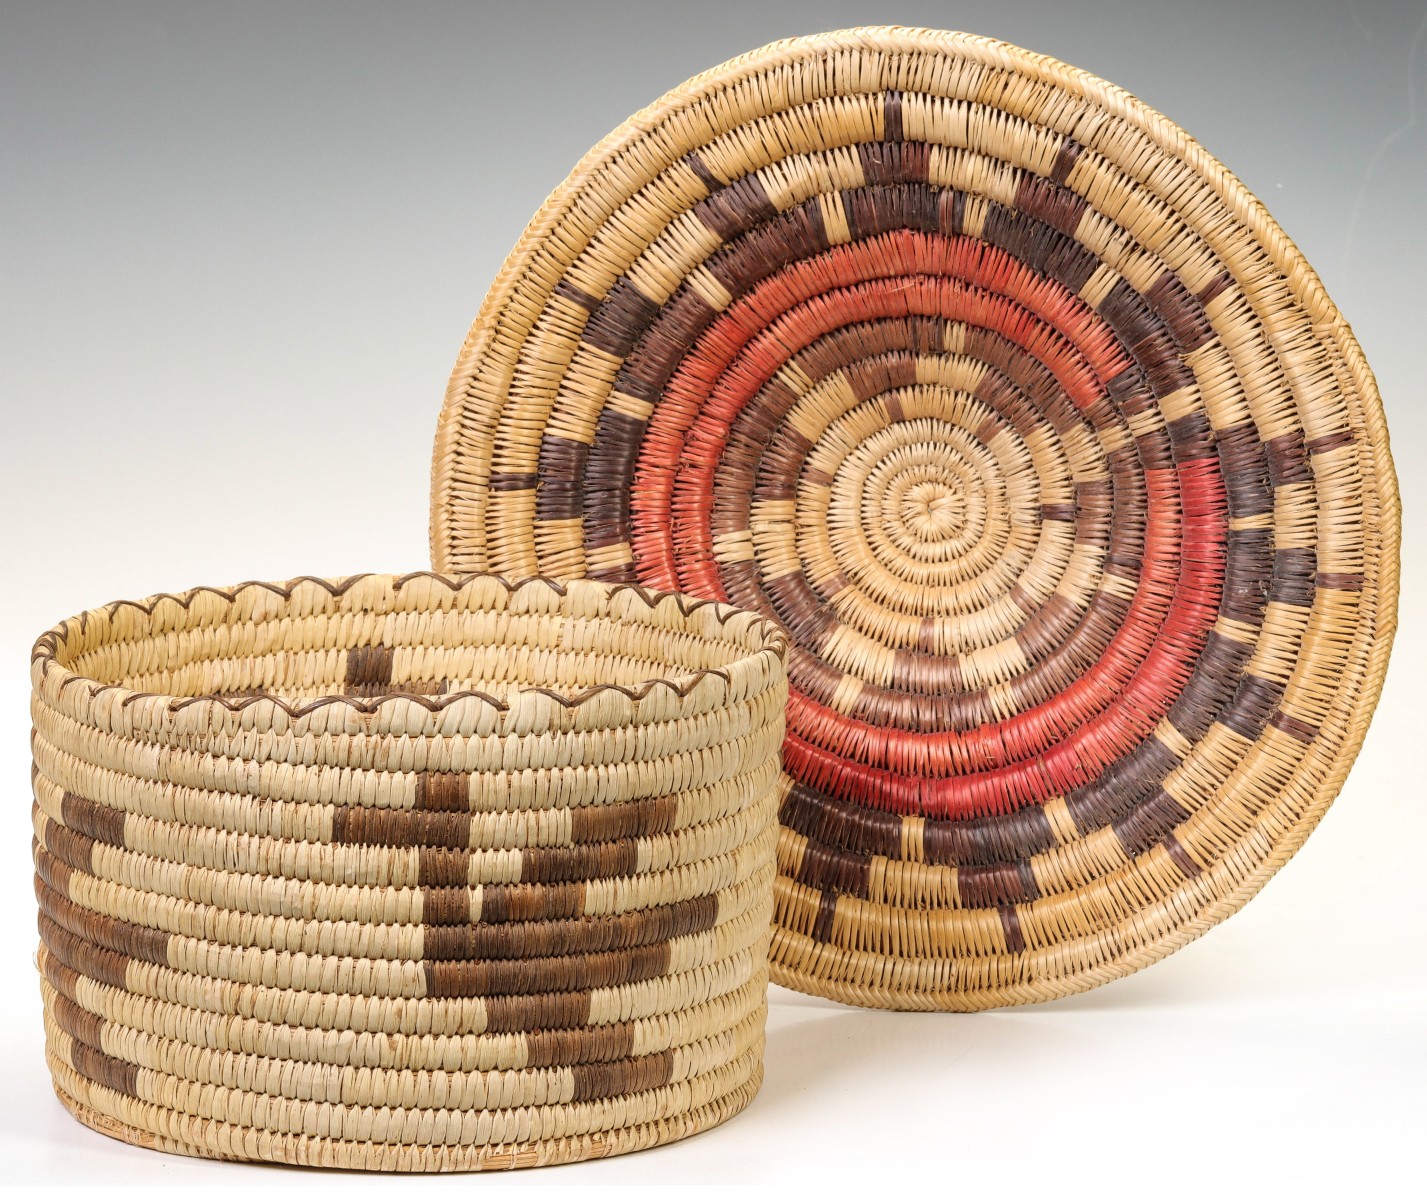 A LARGE PICTORIAL BASKET AND HOPI WEDDING TRAY